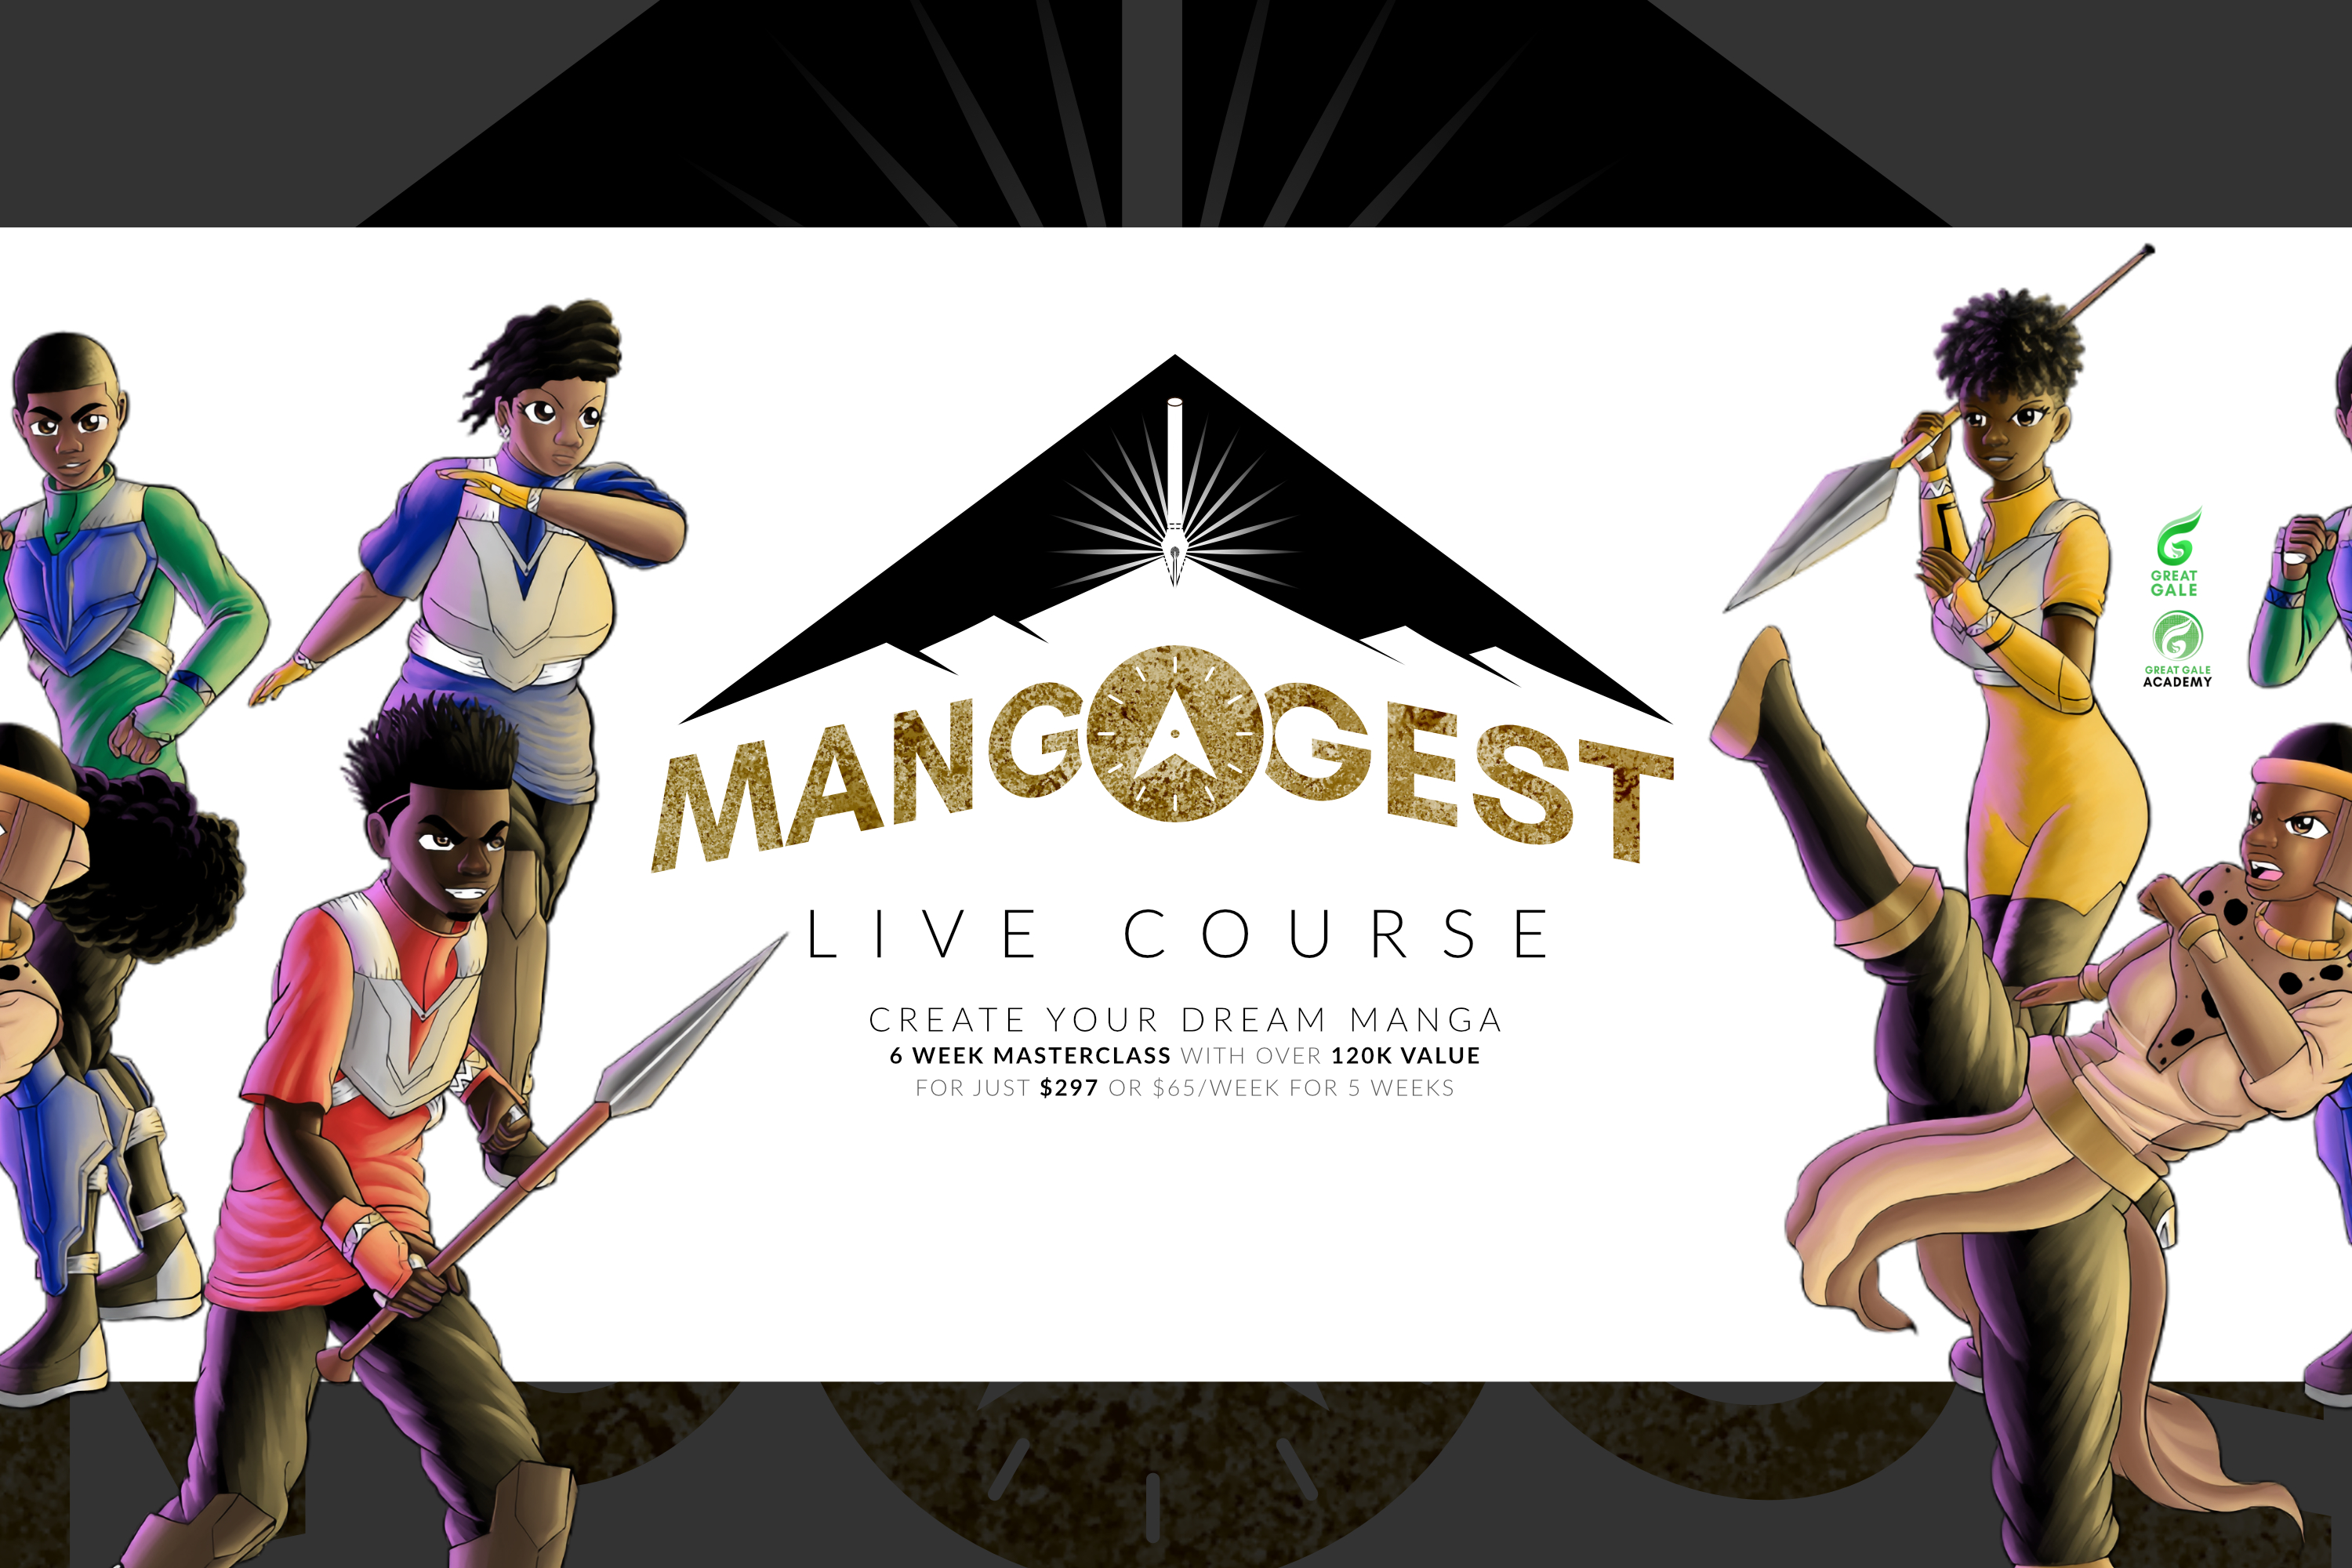 MANGAGEST LIVE COURSE